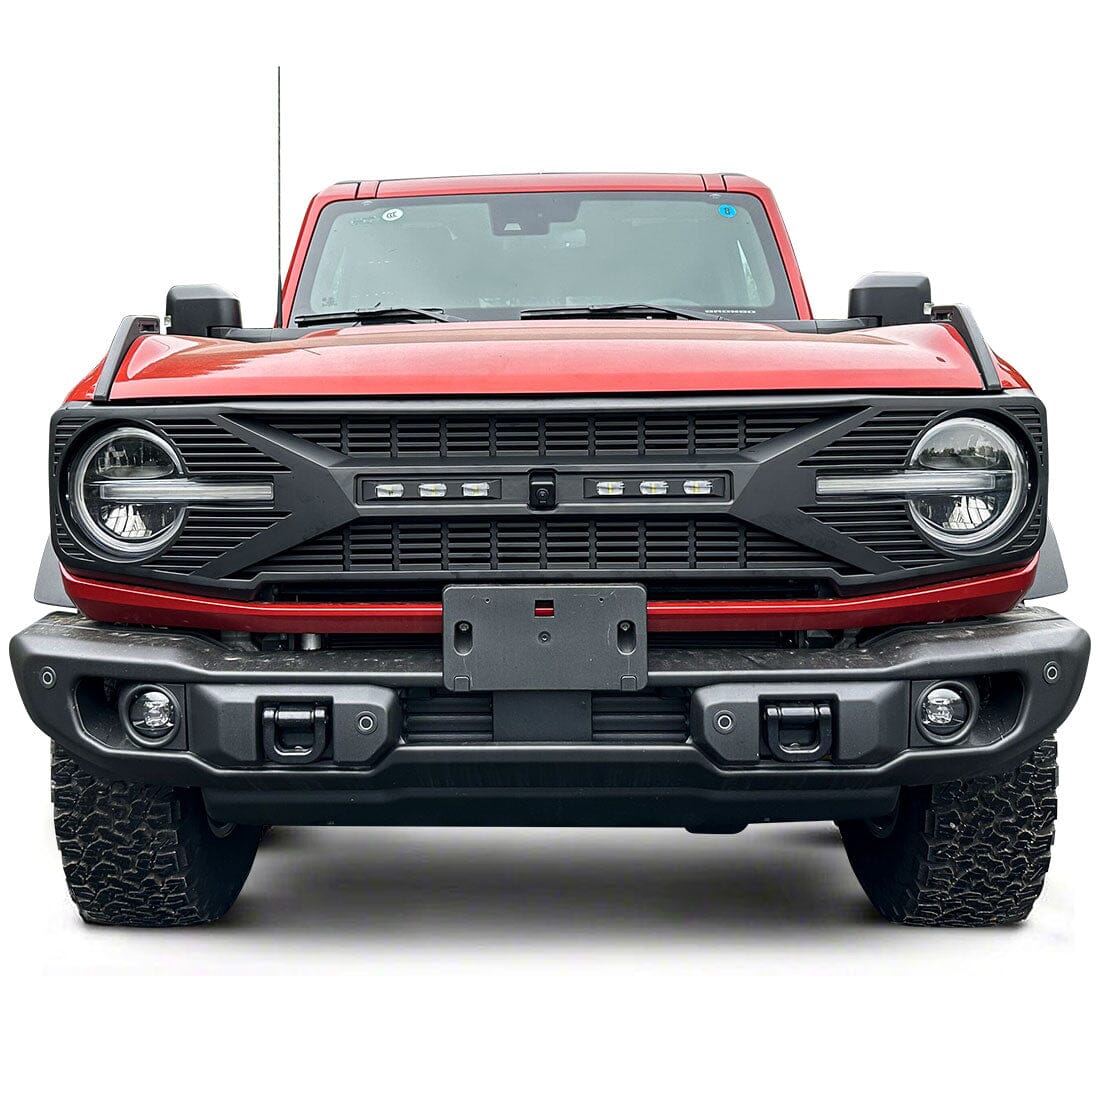 Tomahawk Grille w/ Off-Road Lights& Camera Hole Option For 2021-2023 Ford Bronco